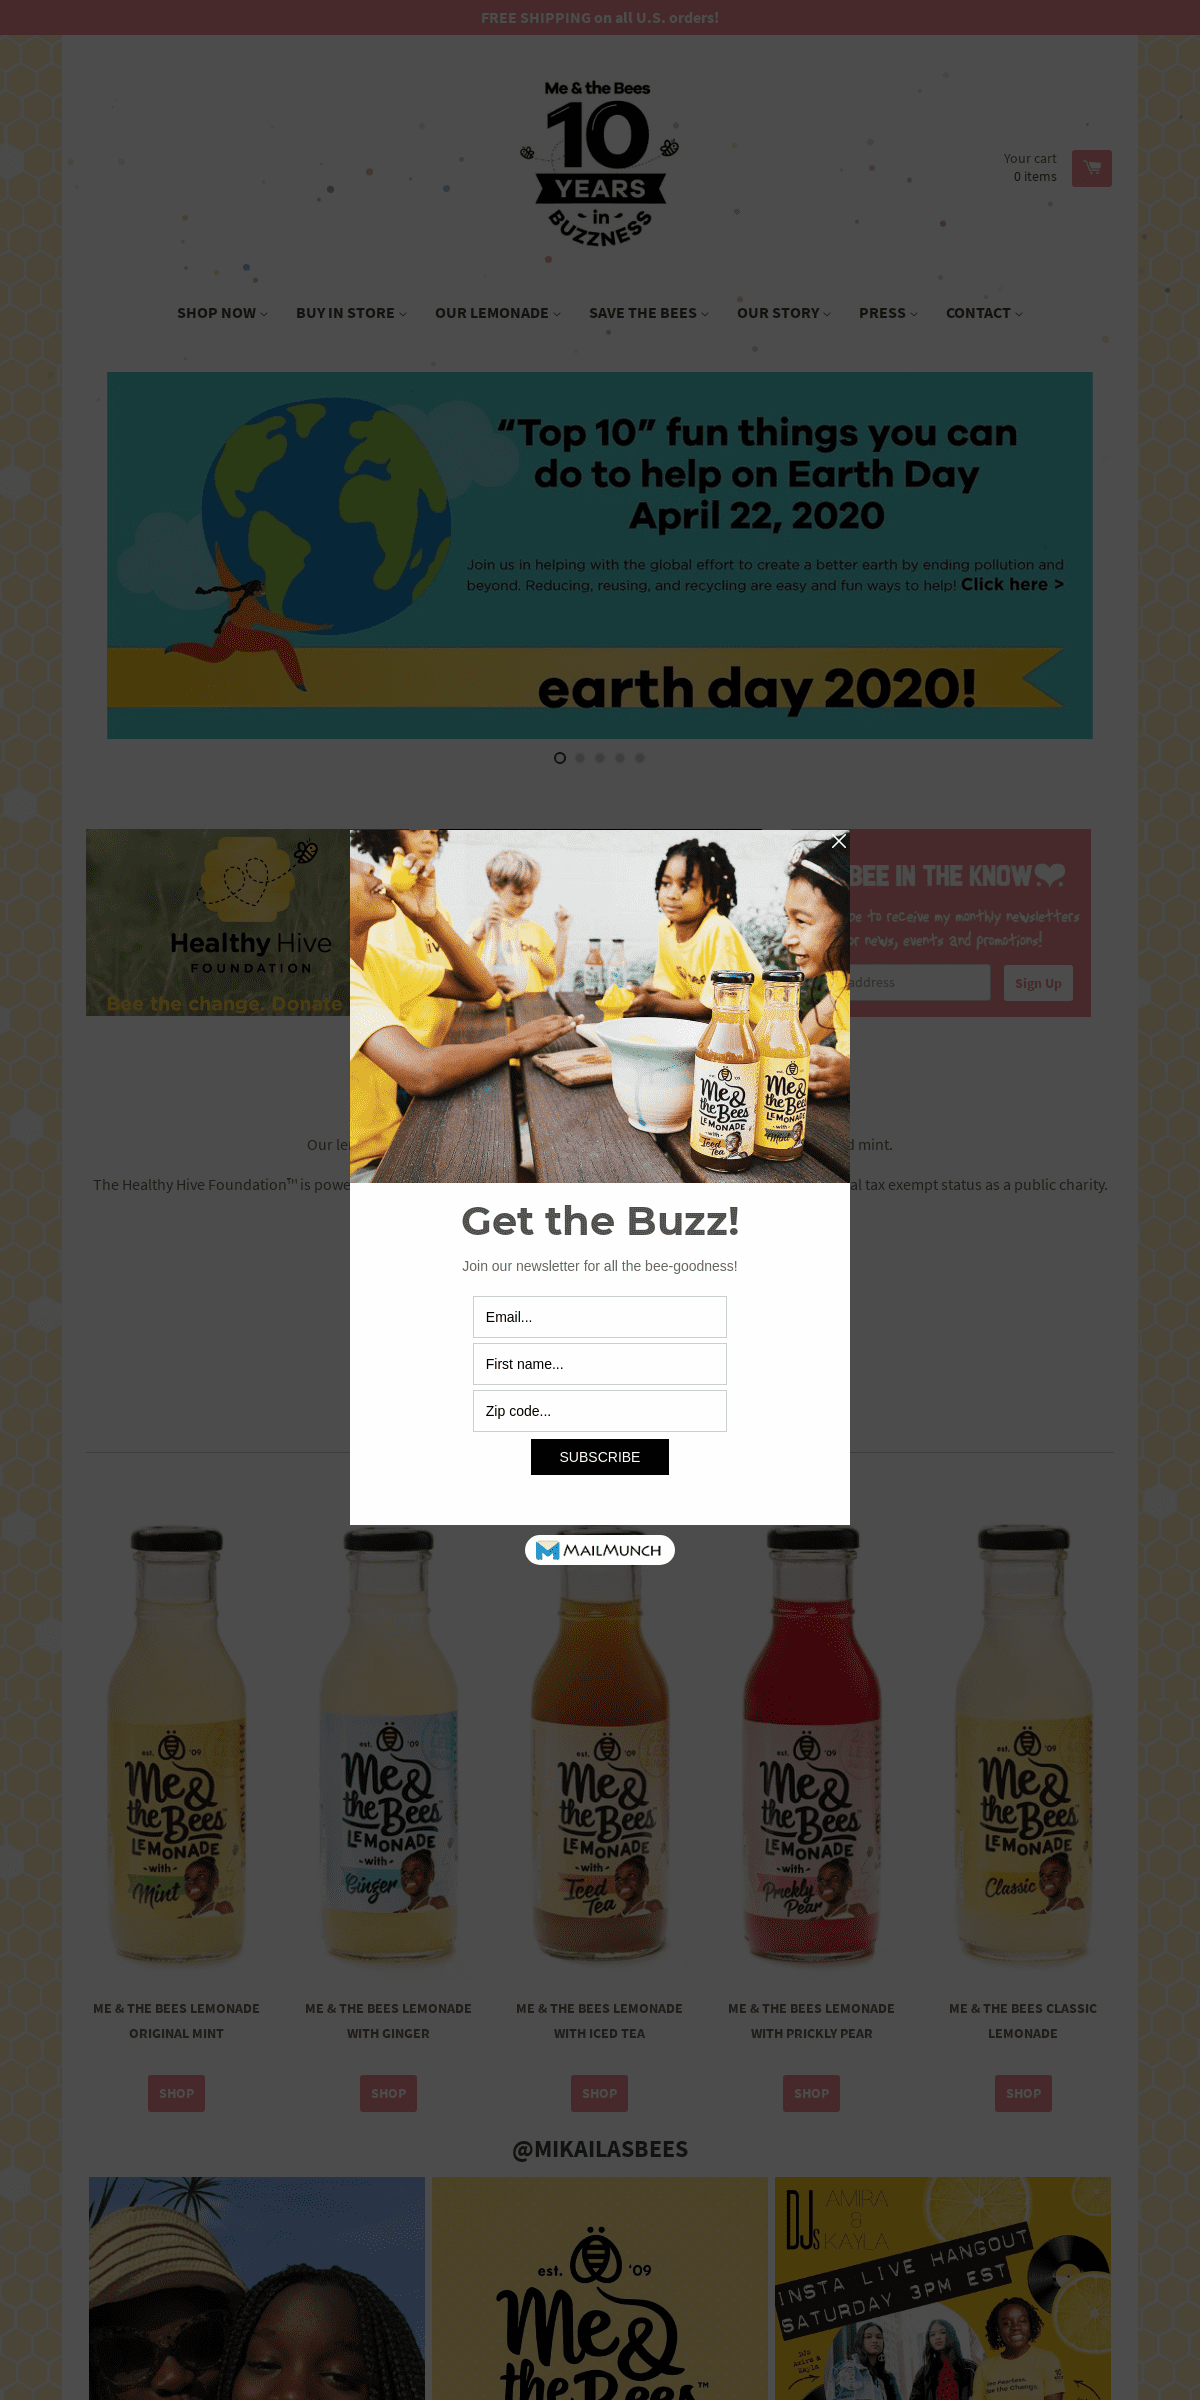 A complete backup of meandthebees.com